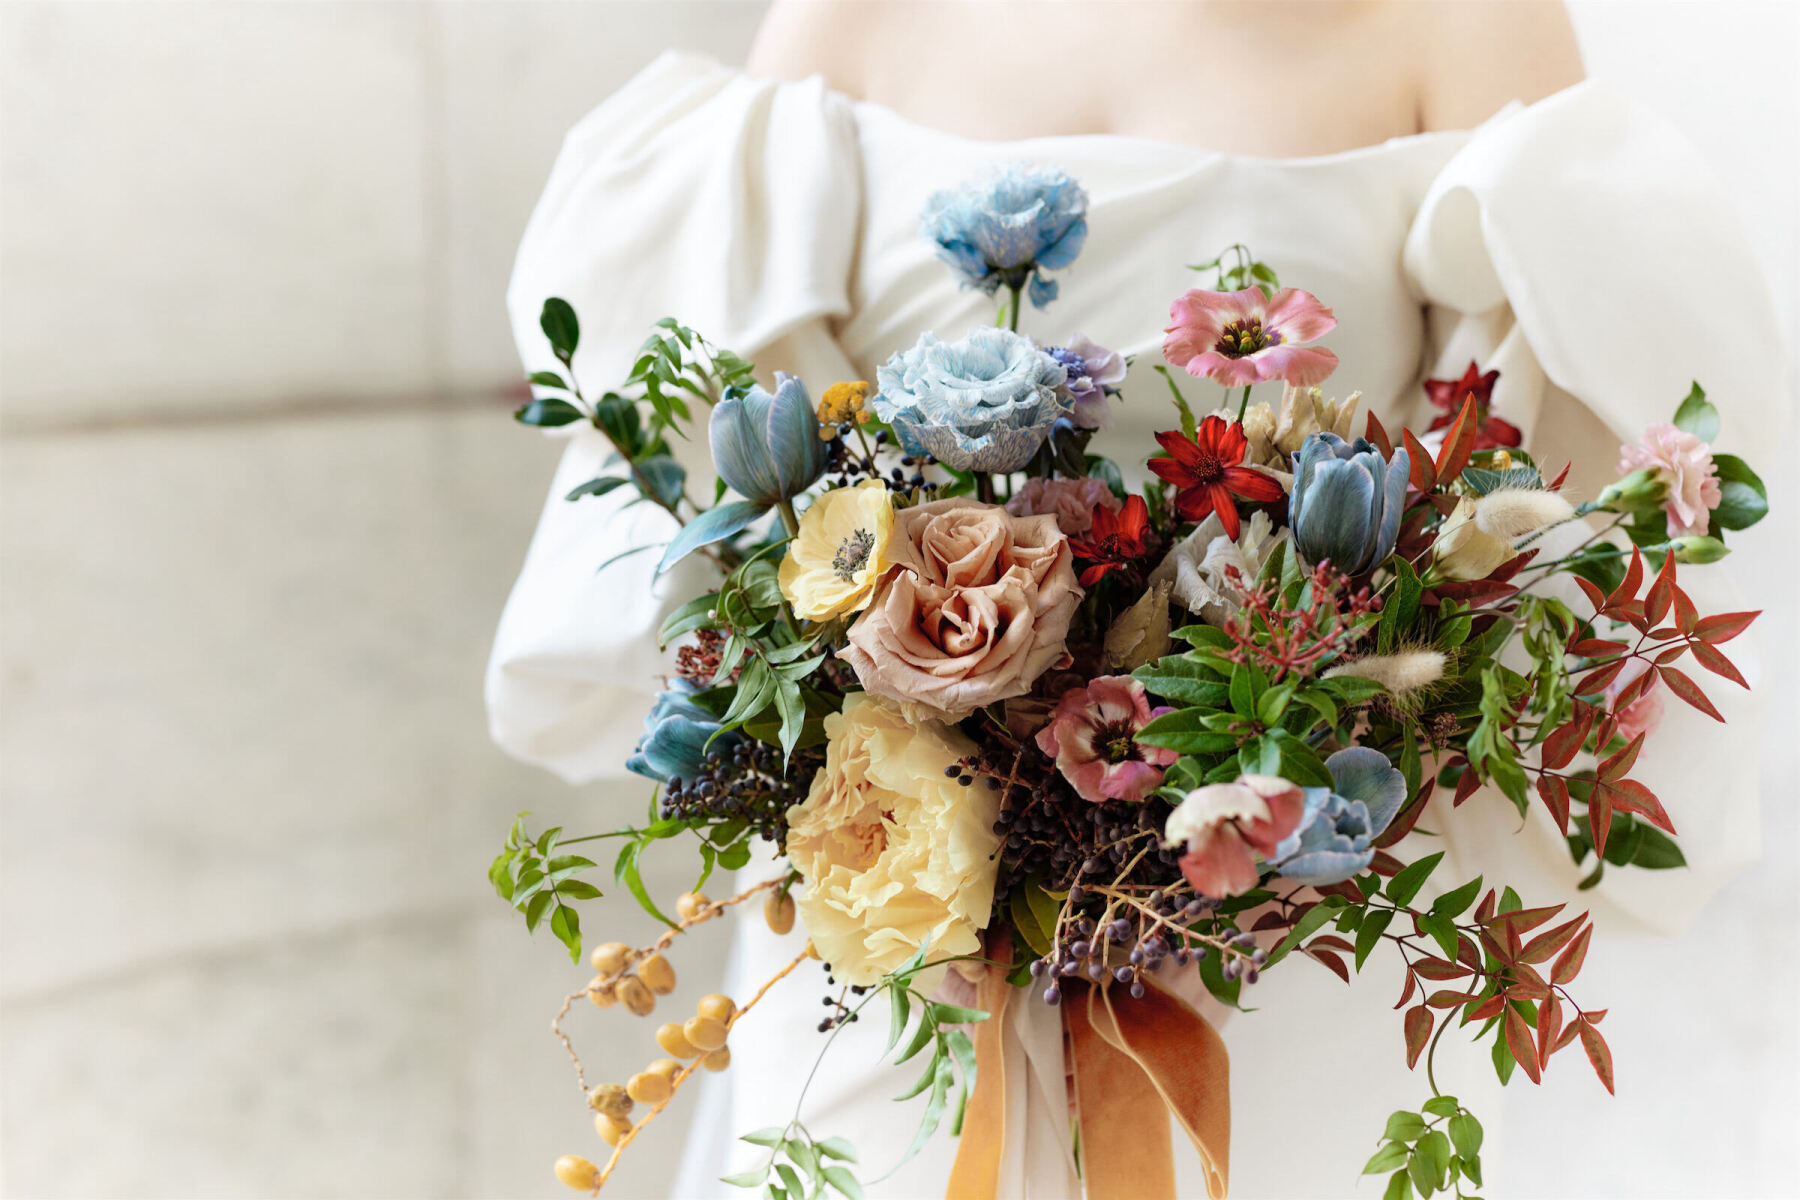 A colorful bridal bouquet made of tulips, roses, anemone, and berries.